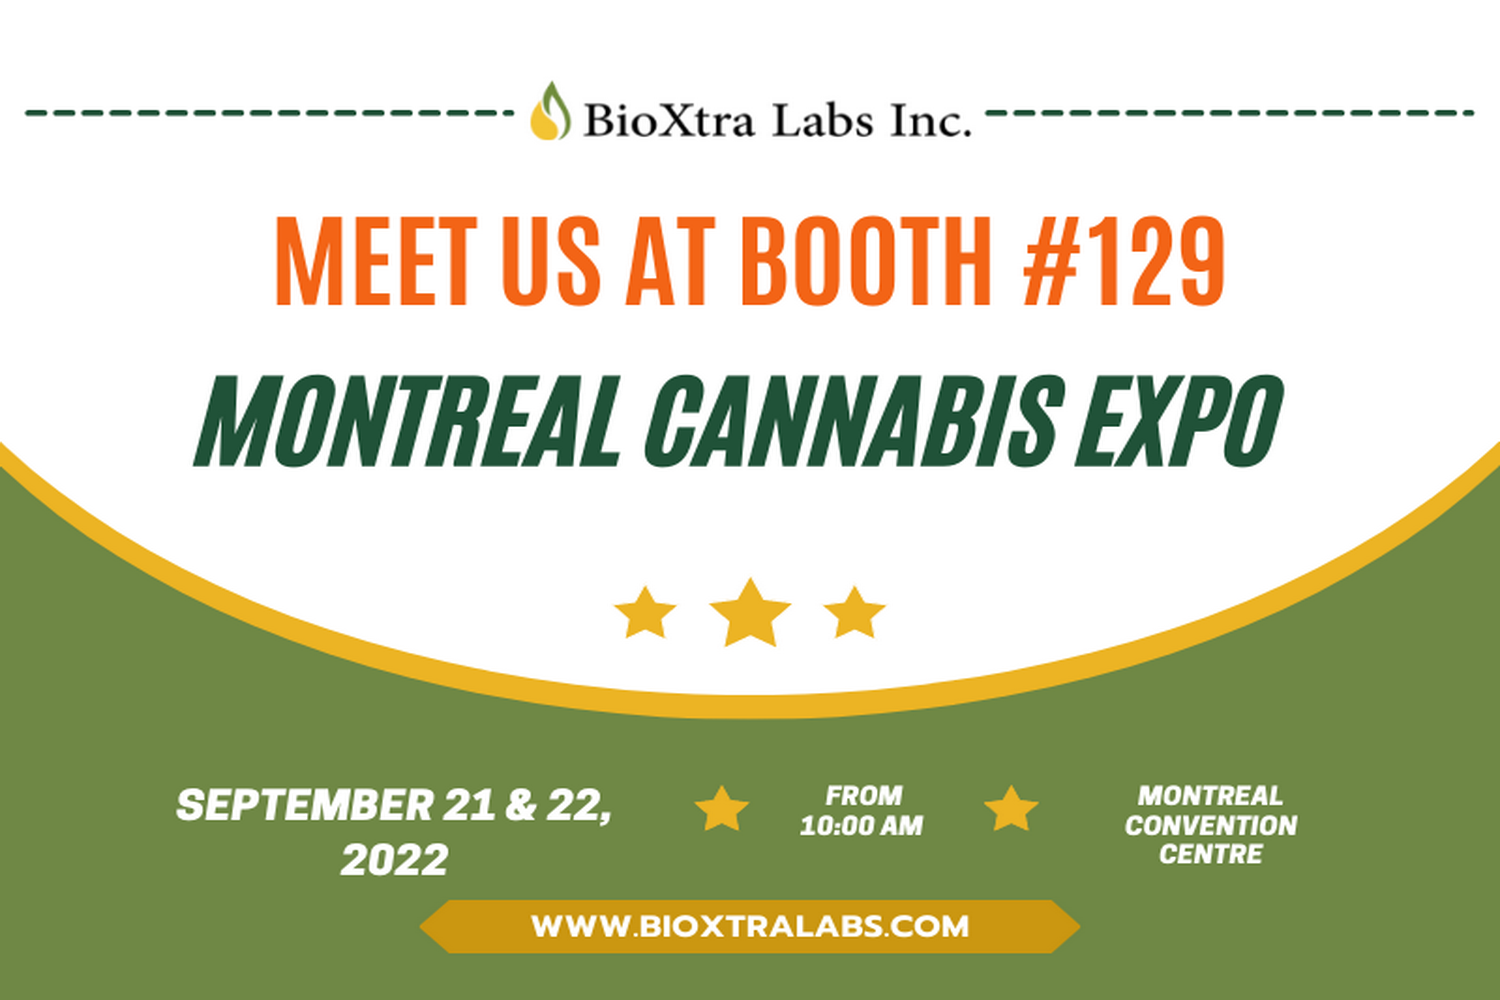 Meet us at Booth #129, Montreal Cannabis Expo September 21st & 22nd 2022